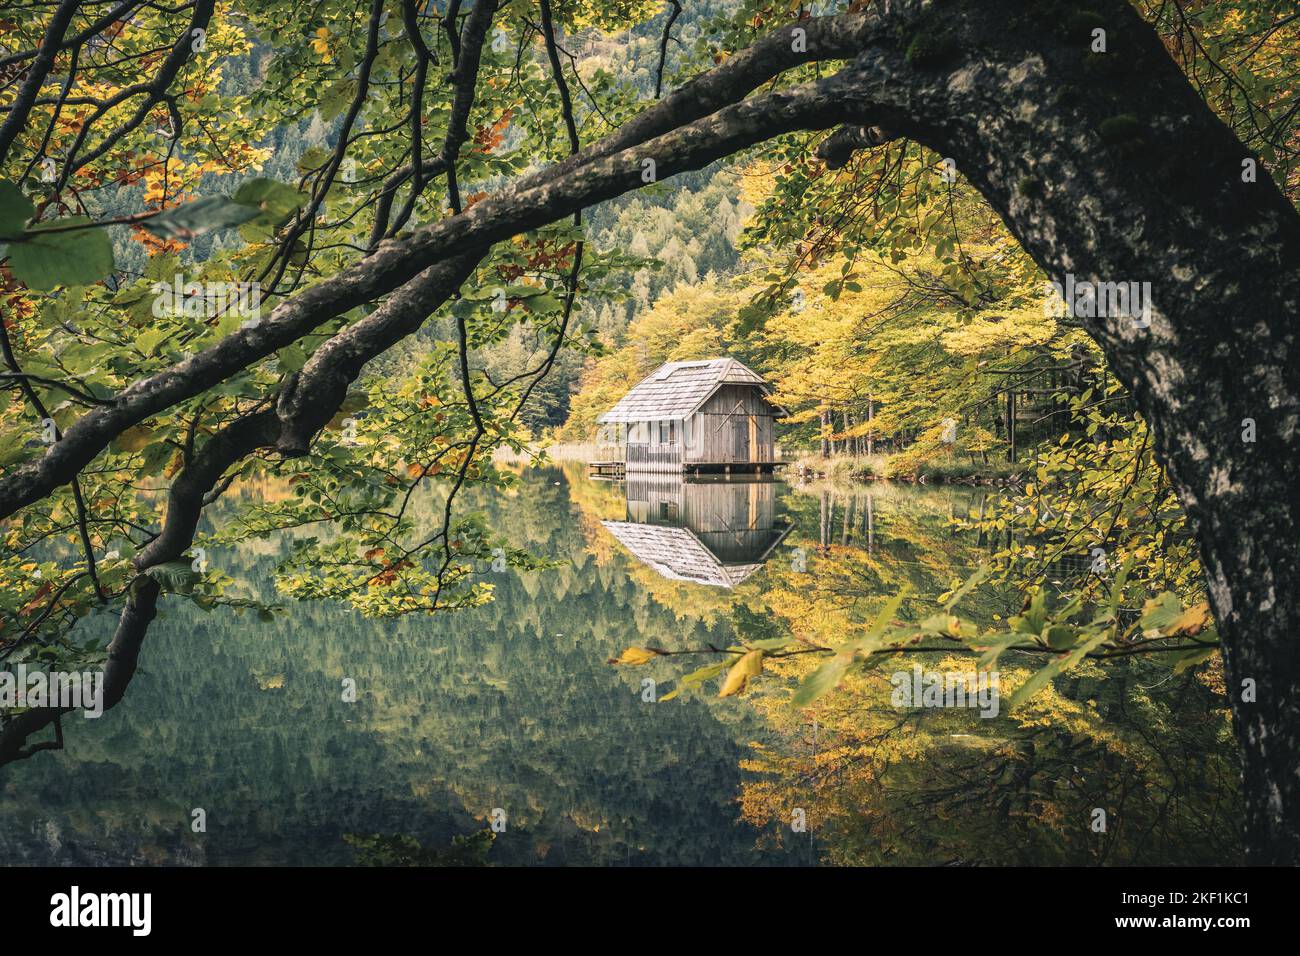 Hinterer Langbathsee close to Gmunden and Ebensee in Austria. Scenic place during moody autumn weather. Stock Photo